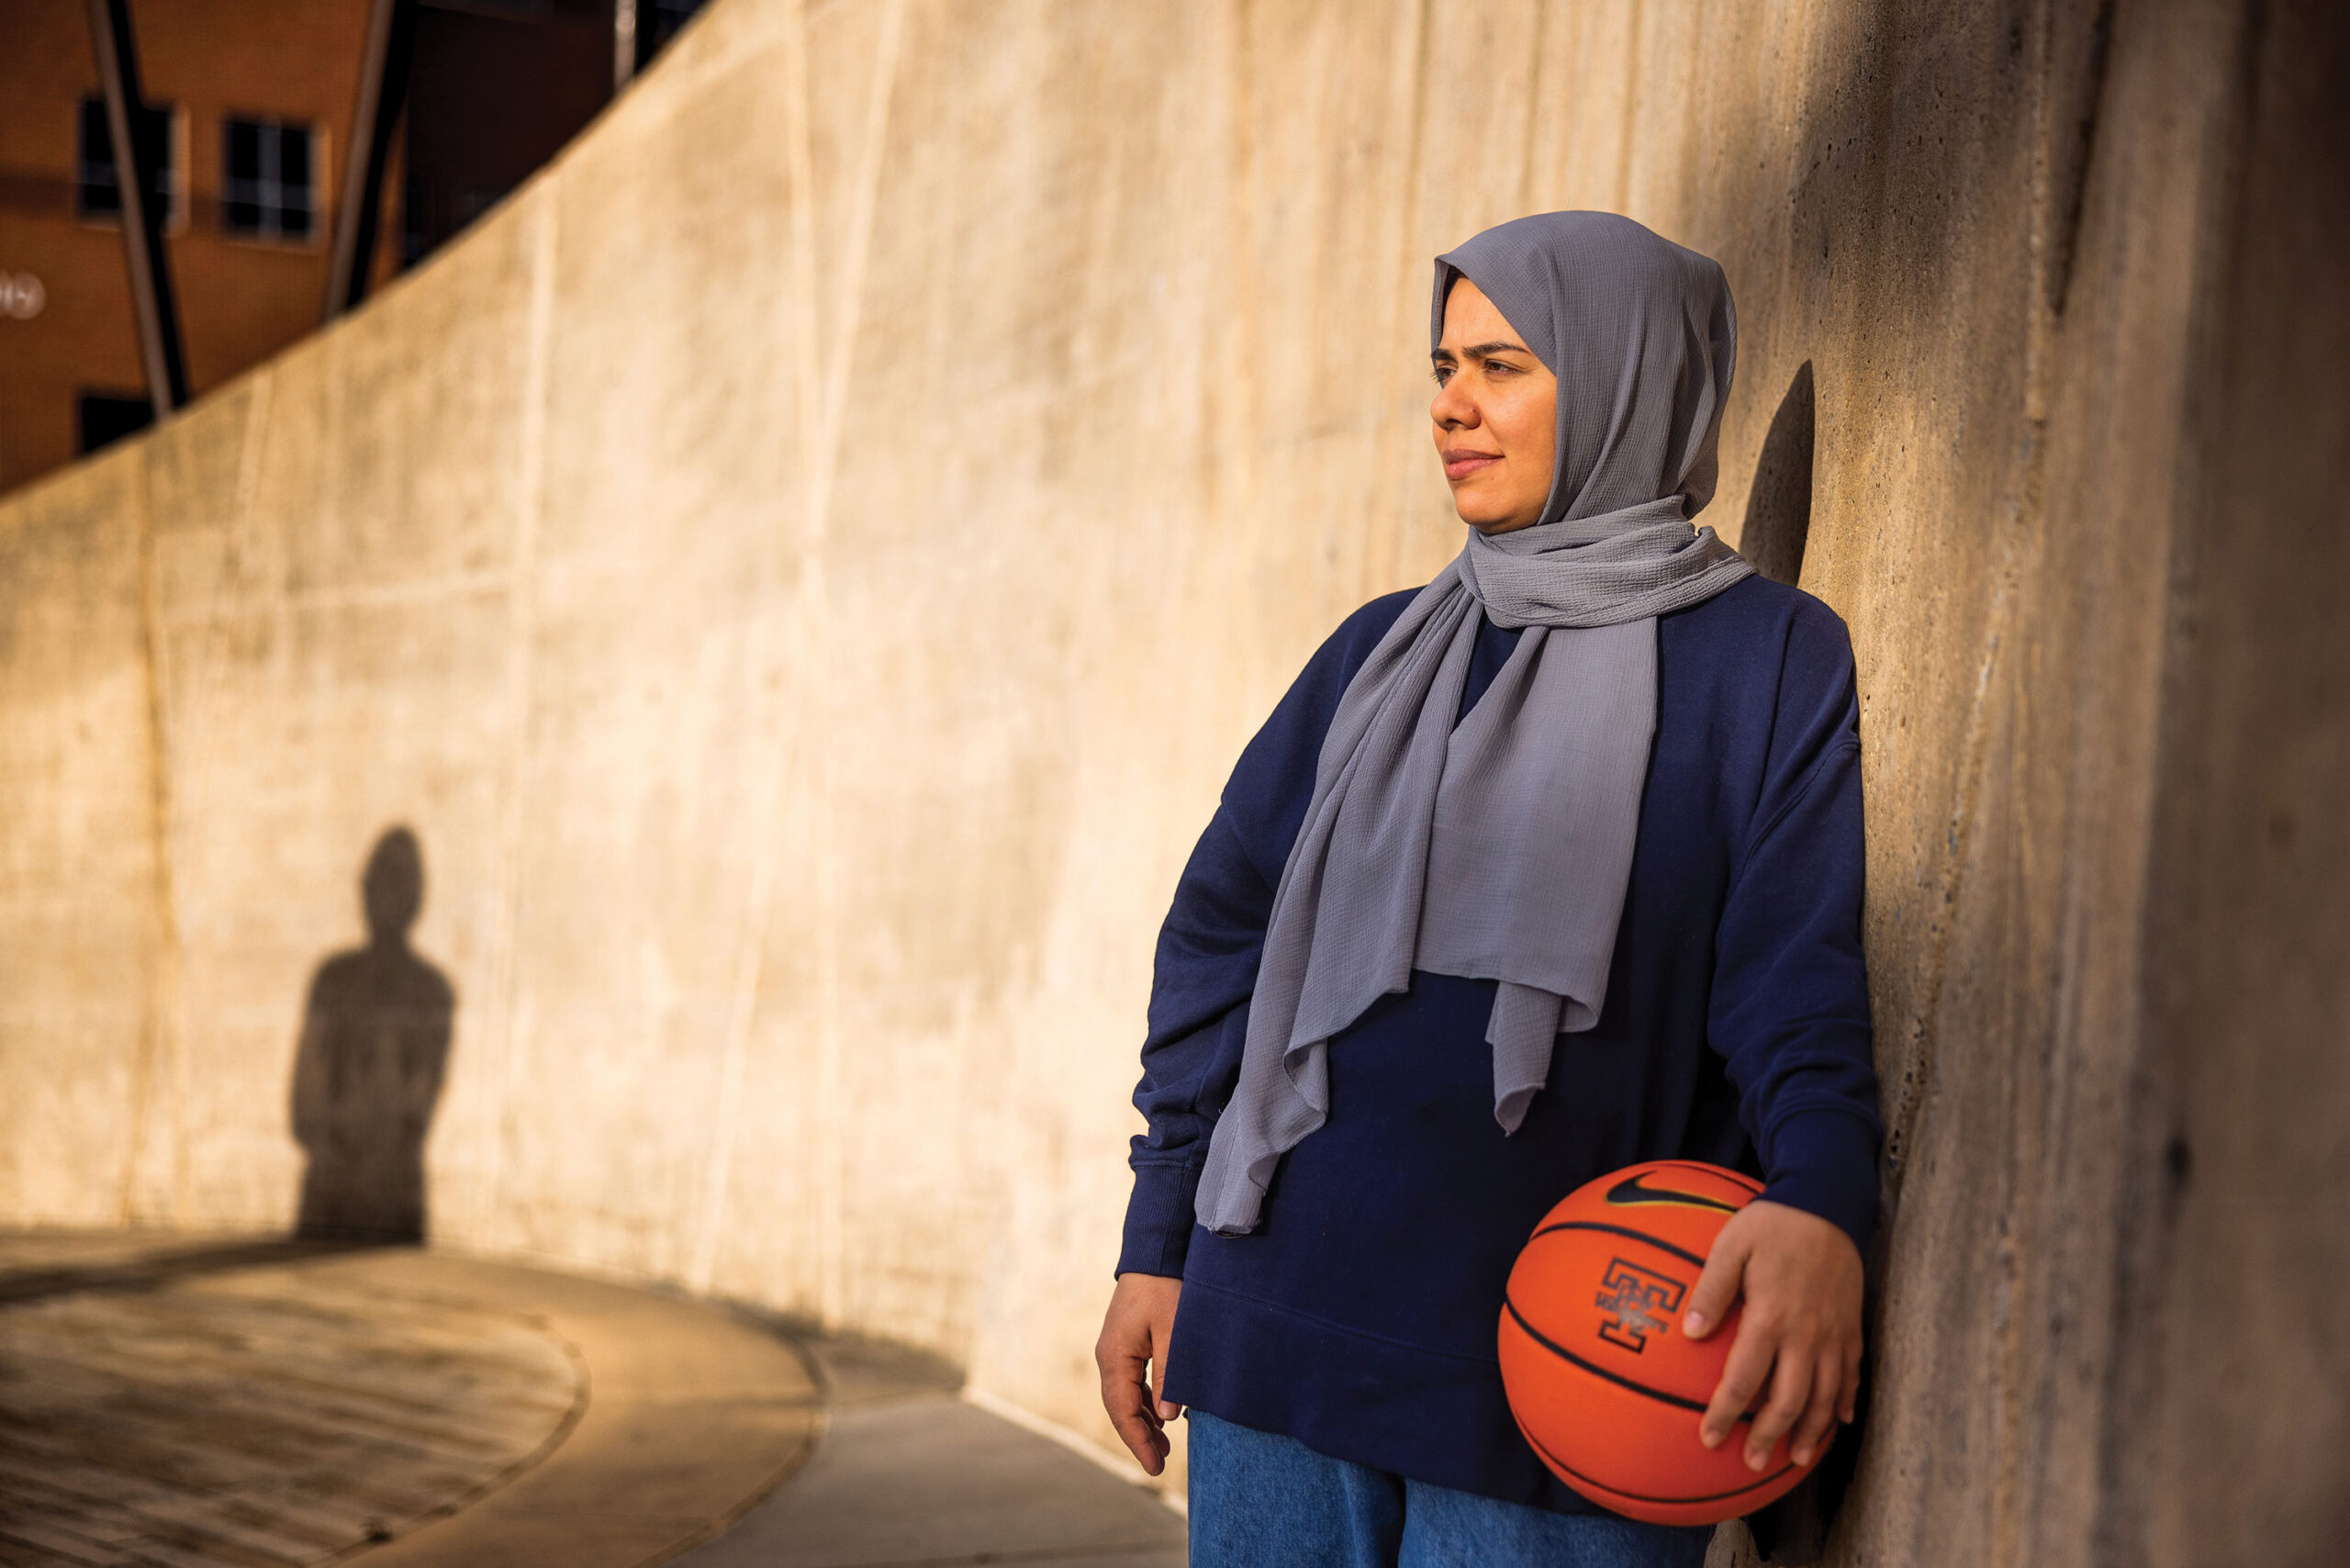 Malalai Anwari leans on a wall with the shadow of Pat Summitt's statue in the background